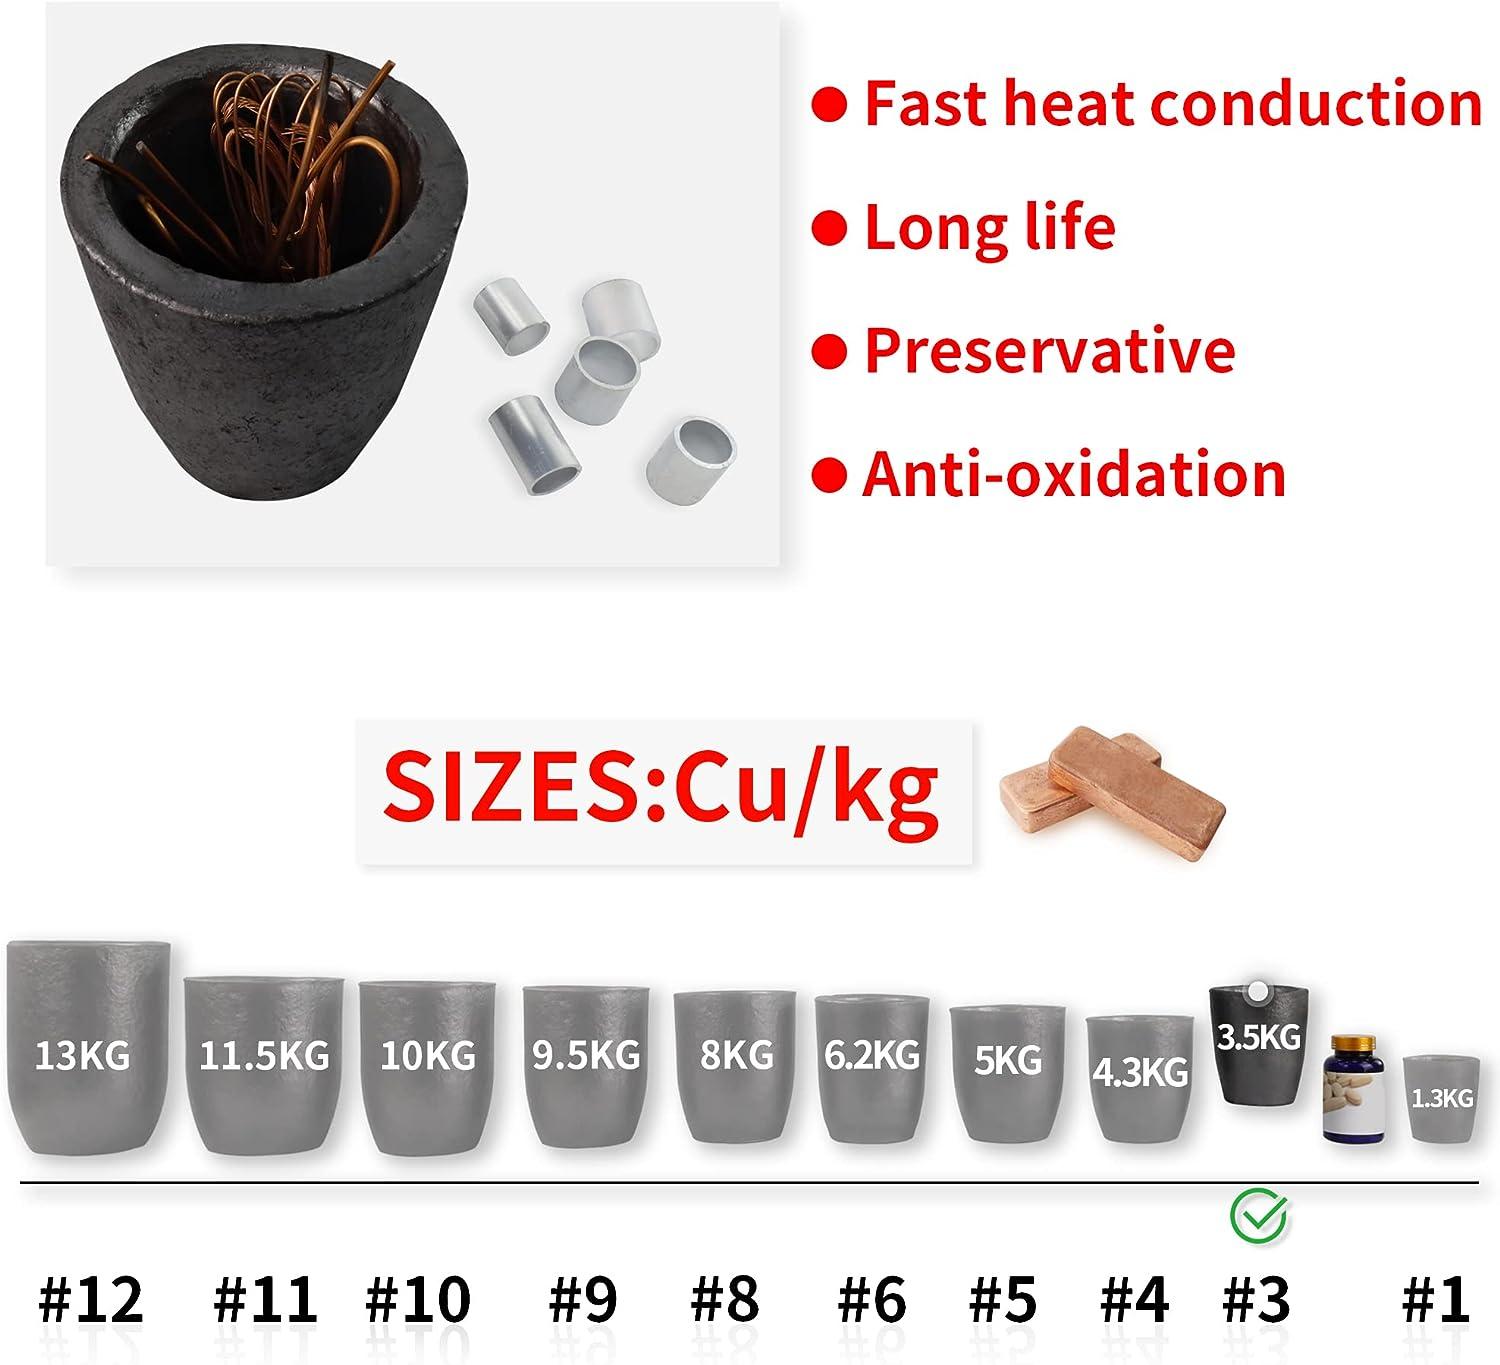 10 12kg Clay Graphite Crucible Cup For Furnace -Torch Melting New